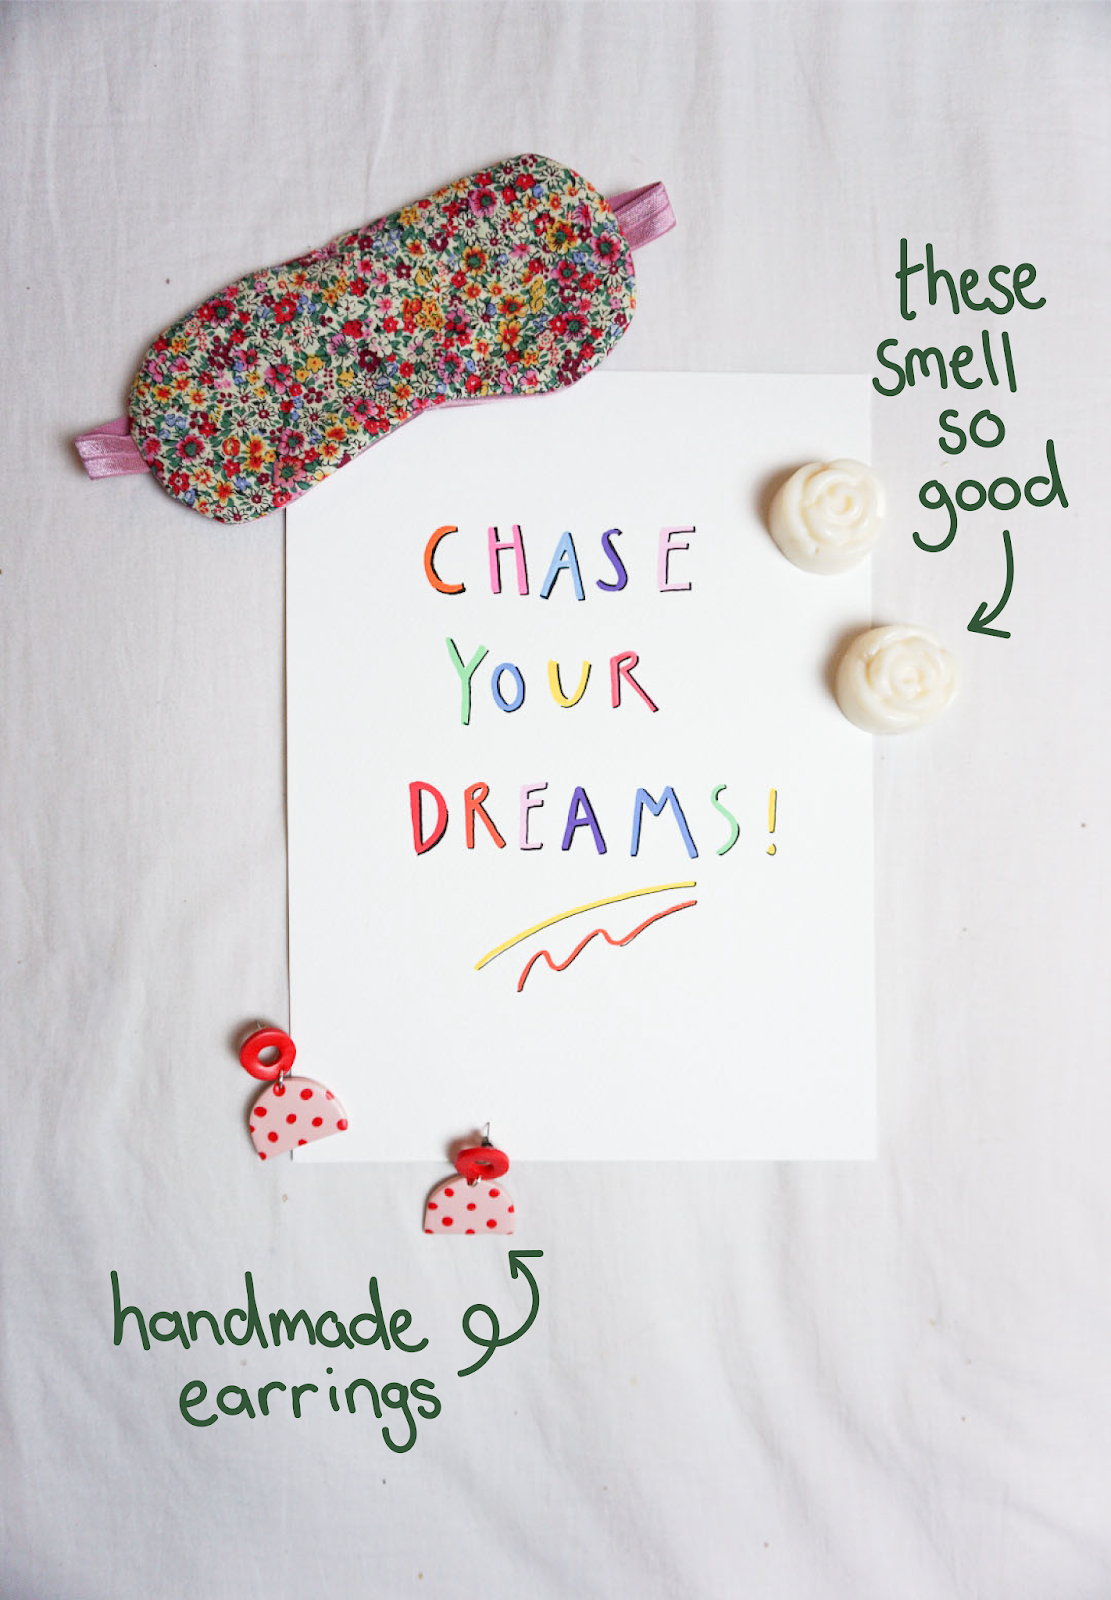 floral print sleep mask, colourful print reading "chase your dreams", cream rose wax melts and pink and red print statement earrings